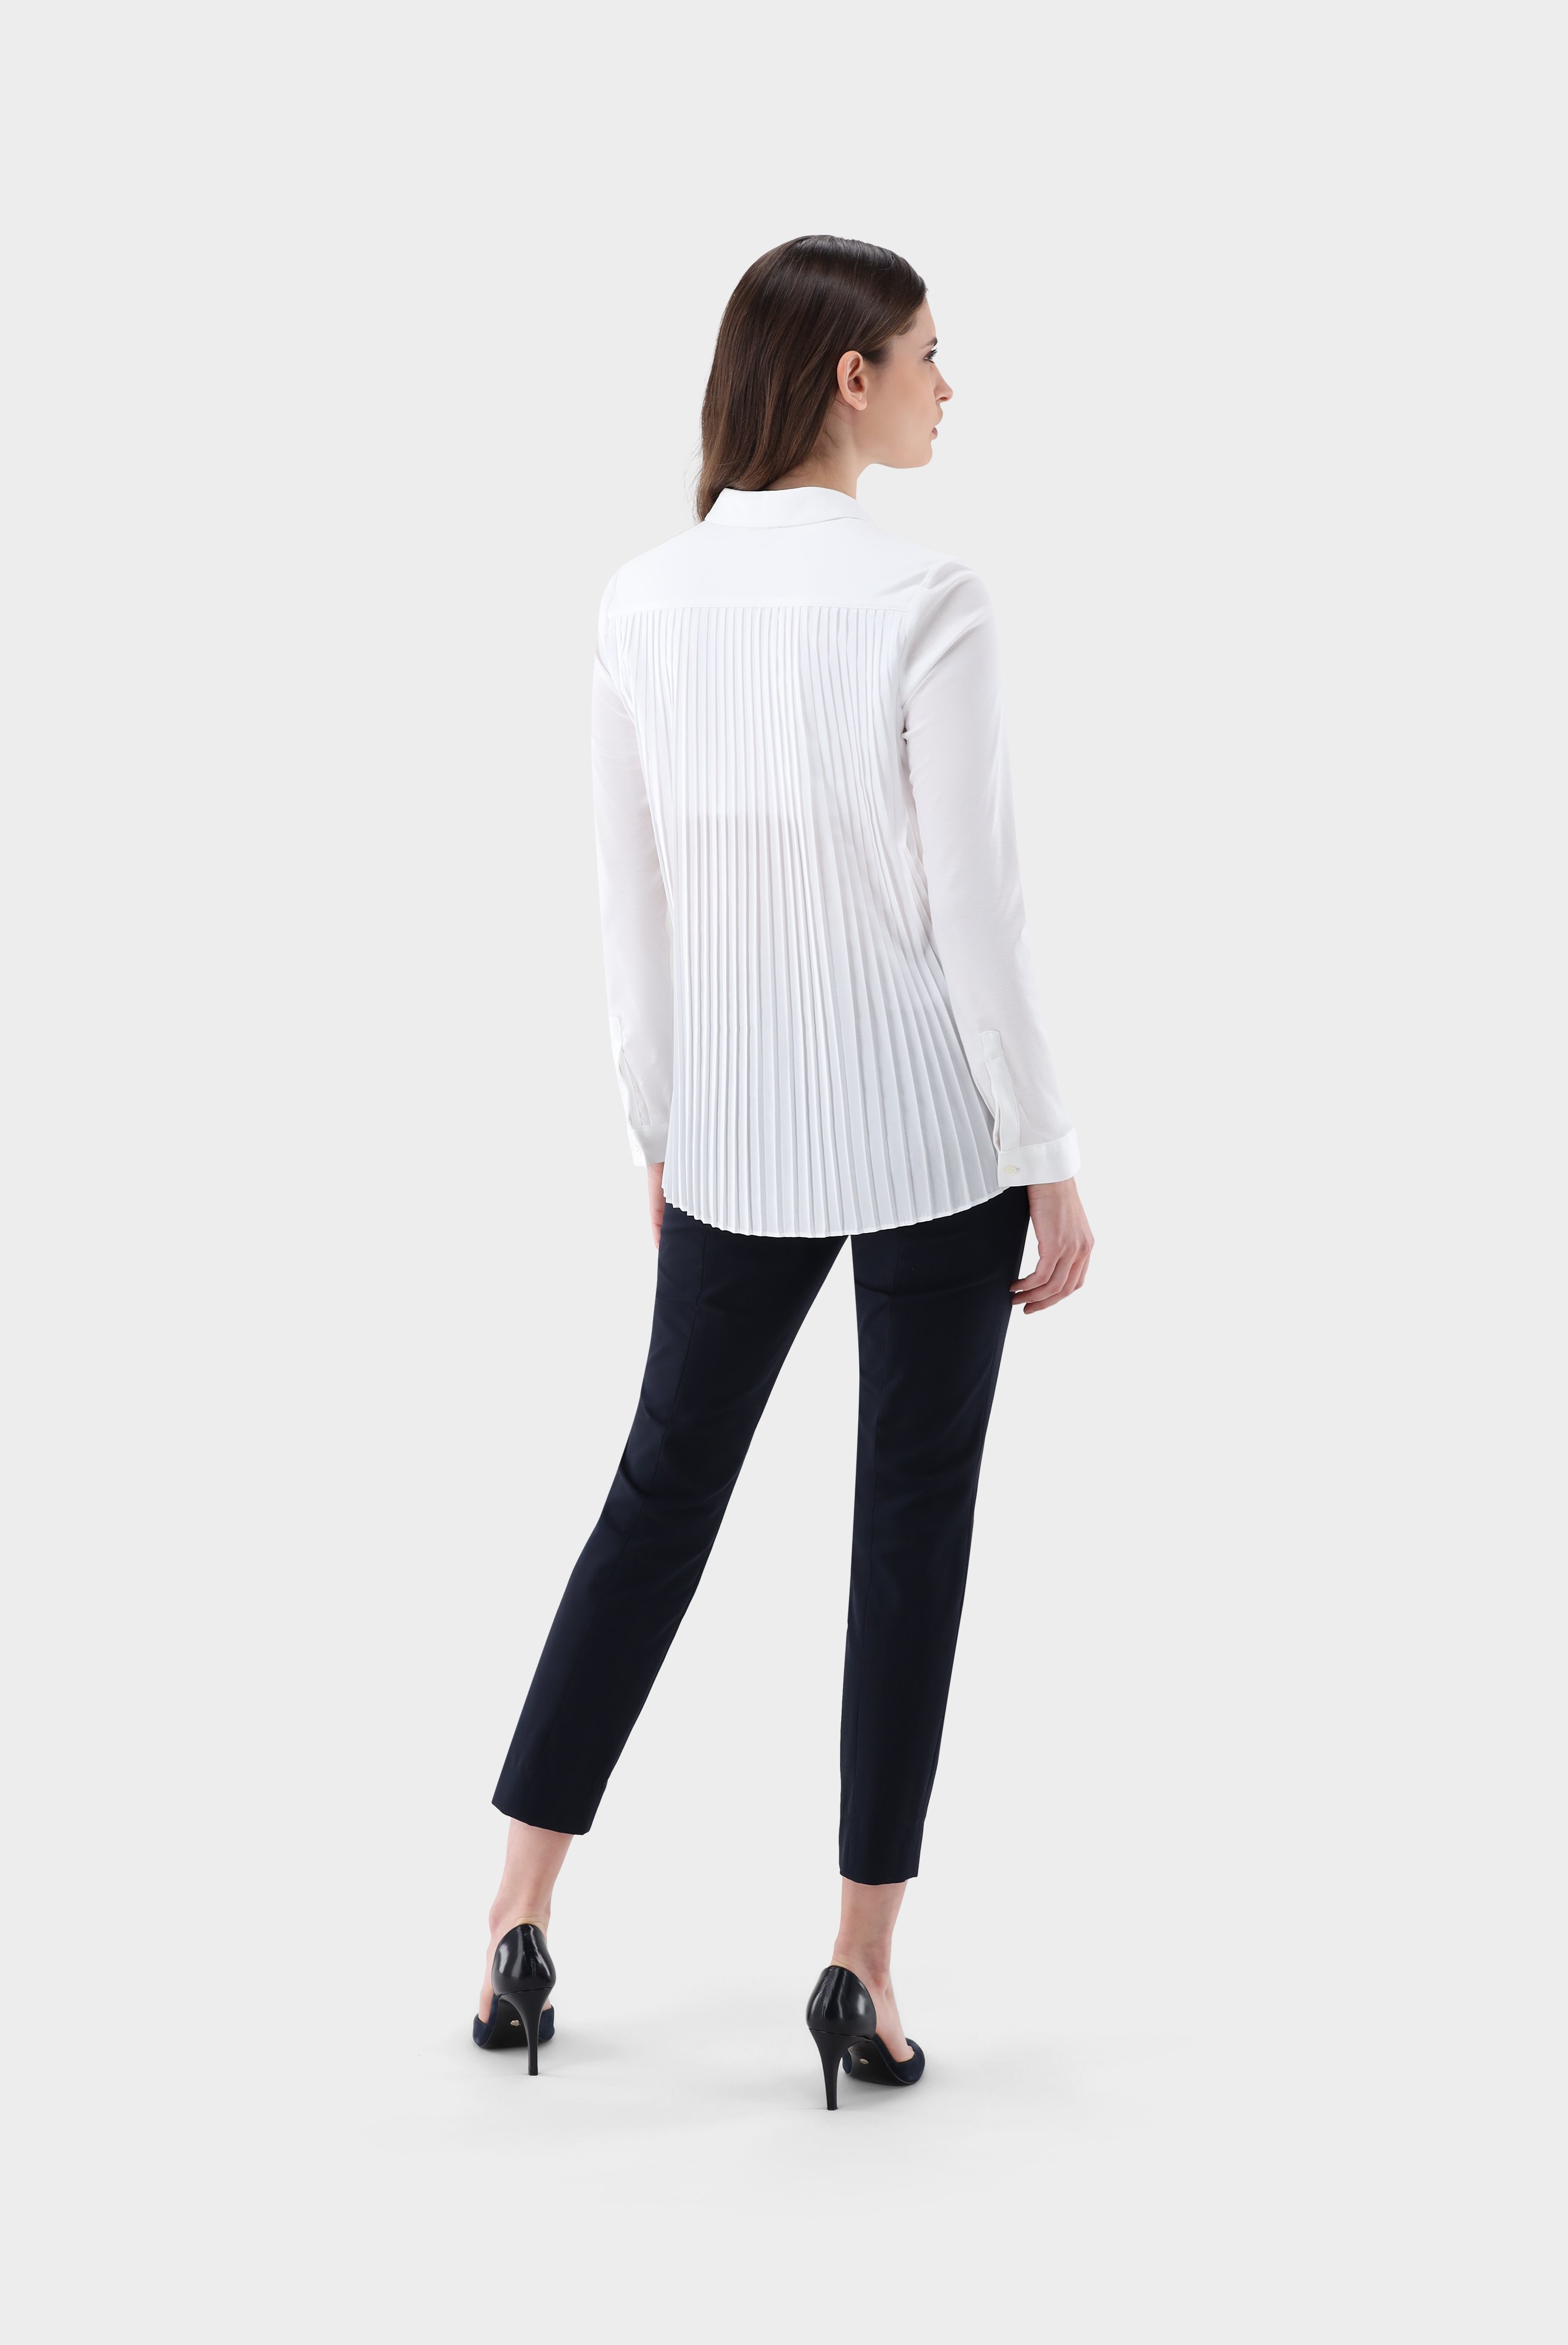 Jersey Blouses+Swiss Cotton Blouse with Pleated Back+05.6703.18.180031.000.32